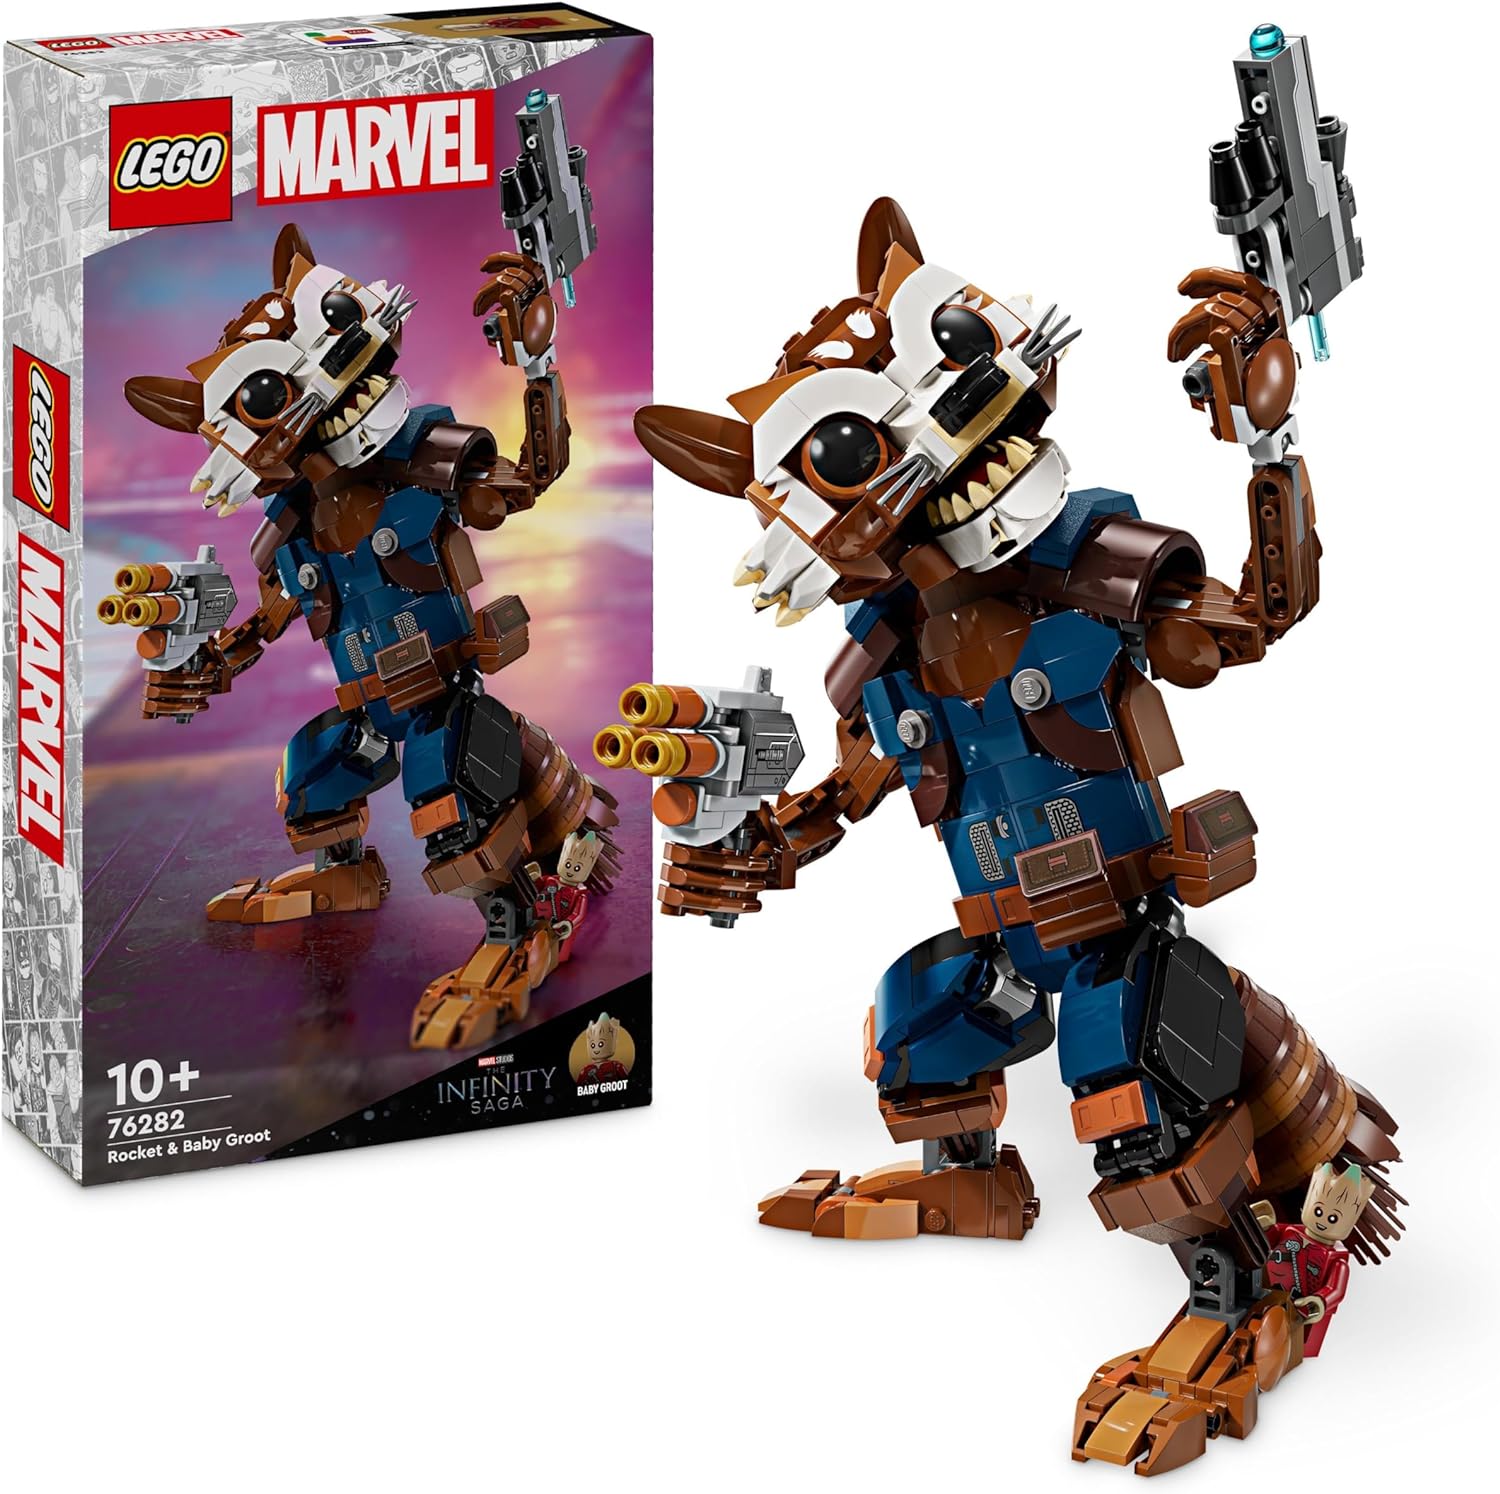 LEGO Marvel Rocket & Baby Groot, Buildable Superhero Toy for Kids from Marvel Studios\' Guardians of The Galaxy, Figure for Role Play, Gift for Boys and Girls from 10 Years, 76282